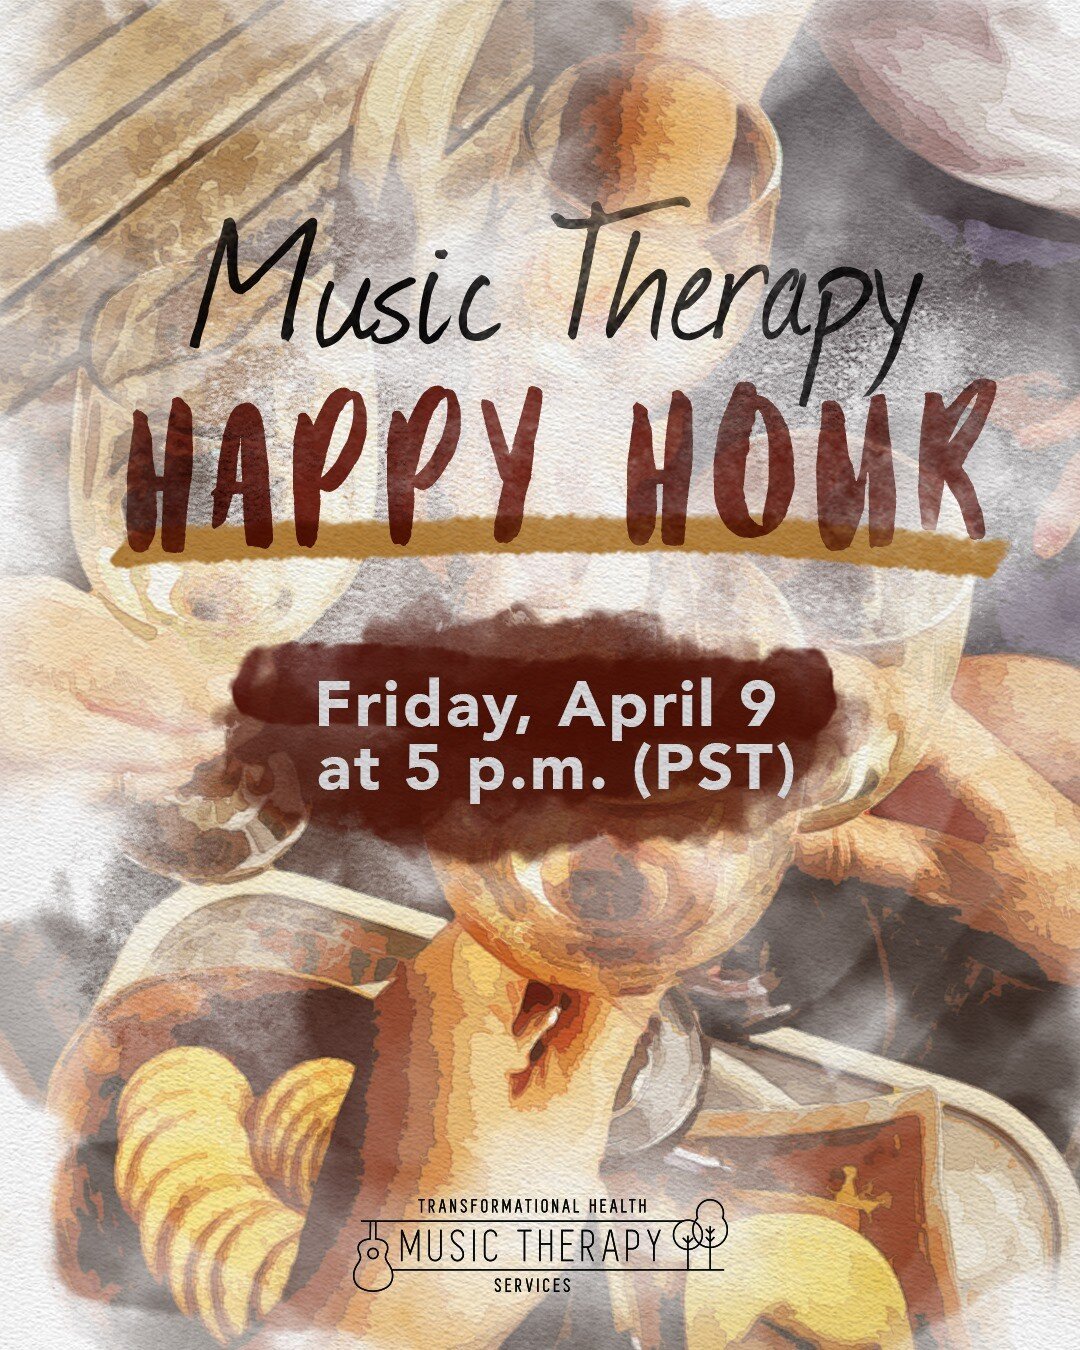 🍷 It's already the SECOND FRIDAY OF THE MONTH. That means it's Music Therapy Happy Hour Time! Please join your colleagues in a casual Zoom conversation about our profession. Link to register is in the profile. See you there!

#musictherapy #musicthe